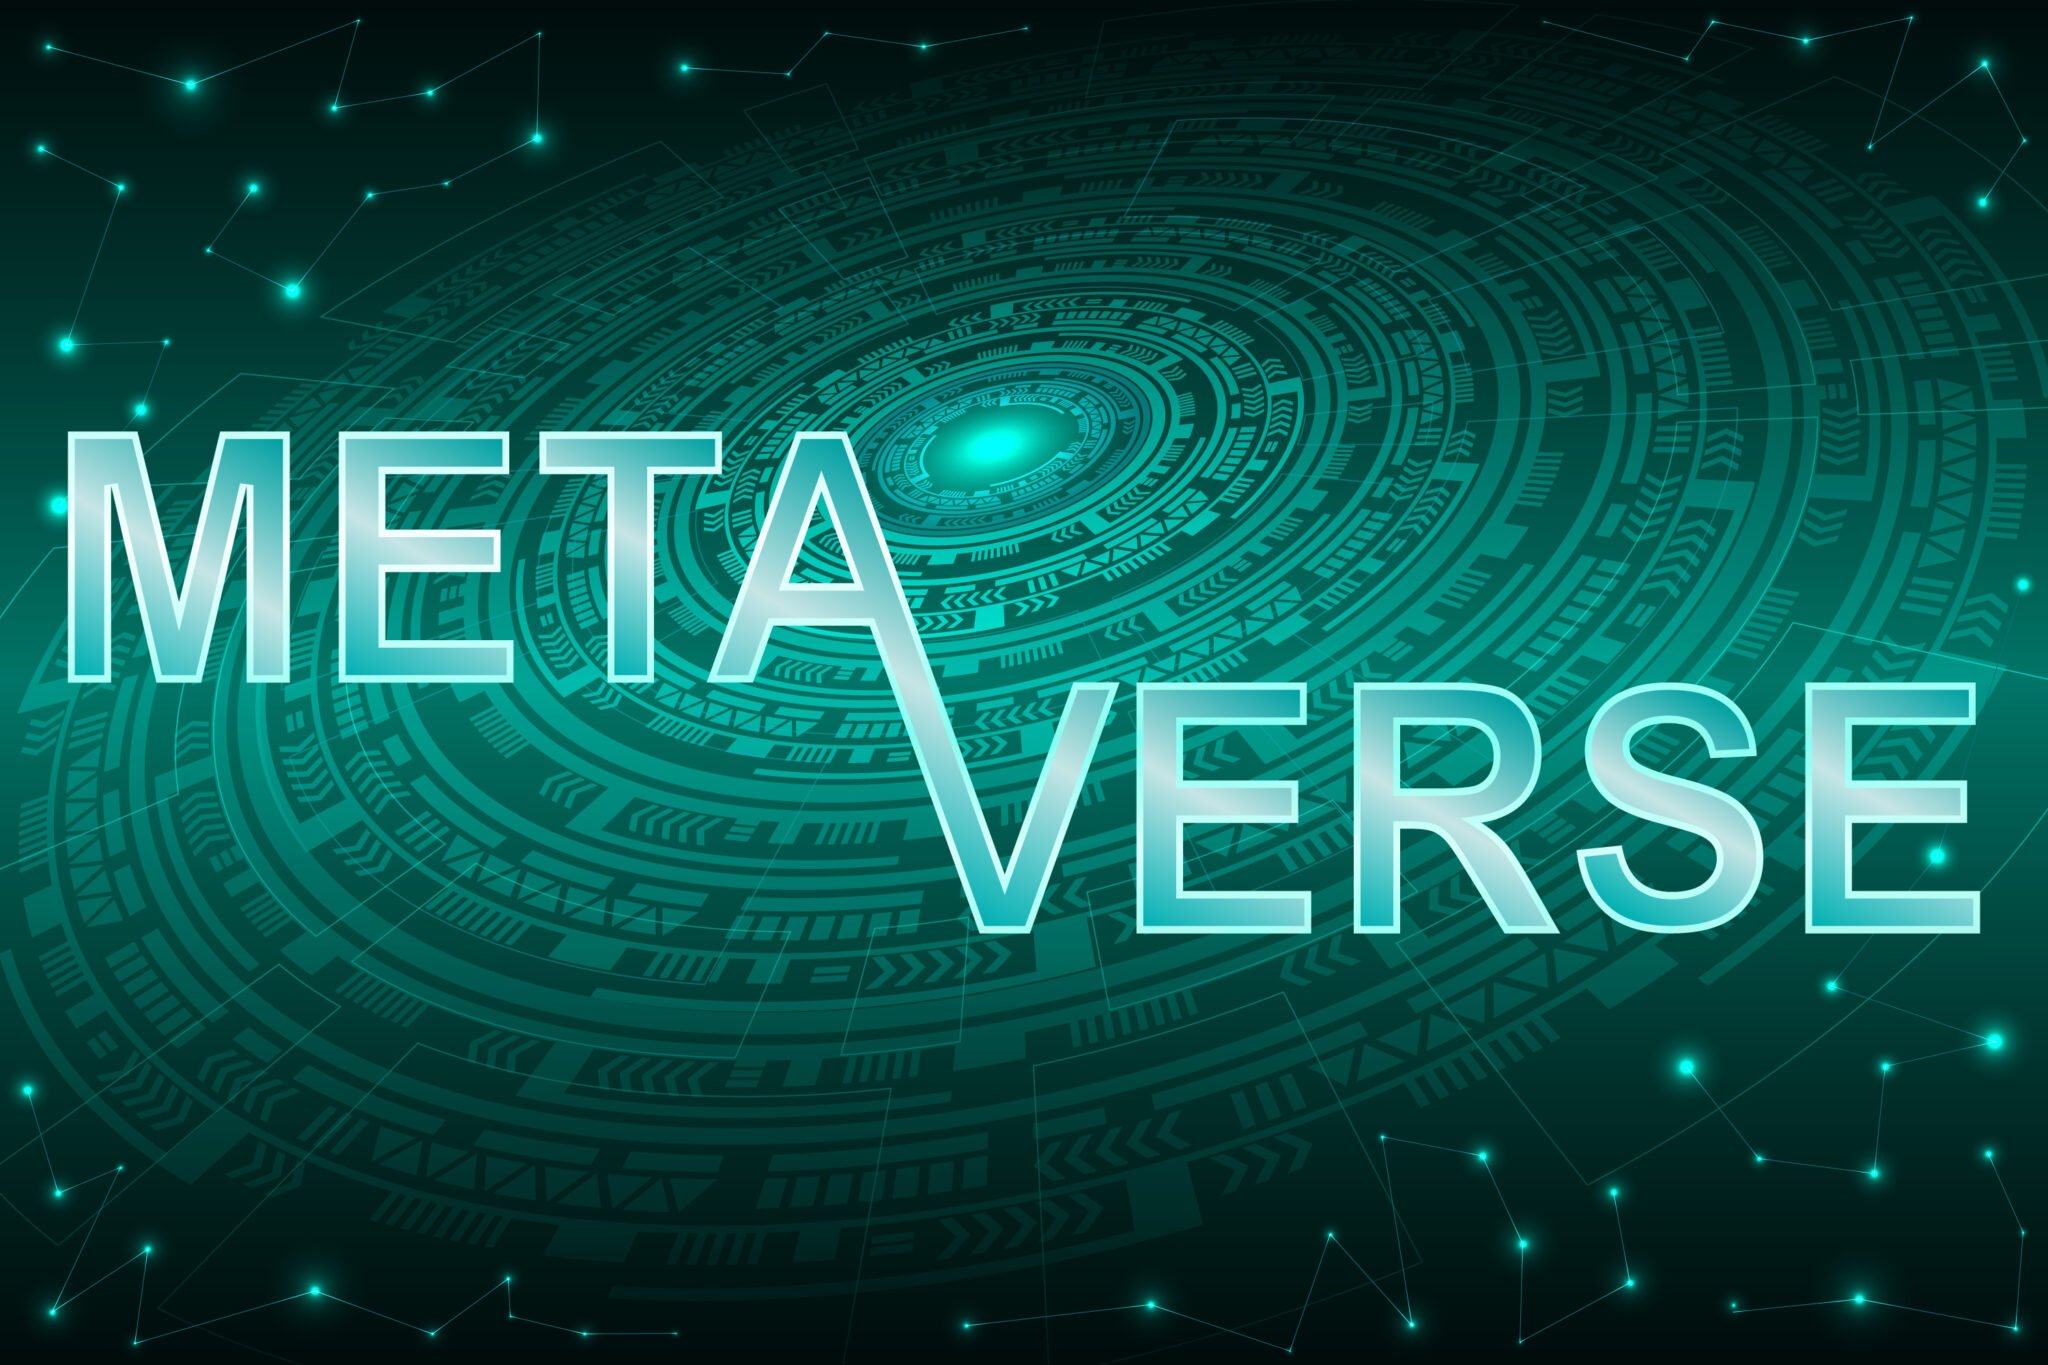 Metaverse text design on an abstract futuristic green background.  Metaverse, virtual reality, augmented reality and blockchain technology, user interface 3D experience.